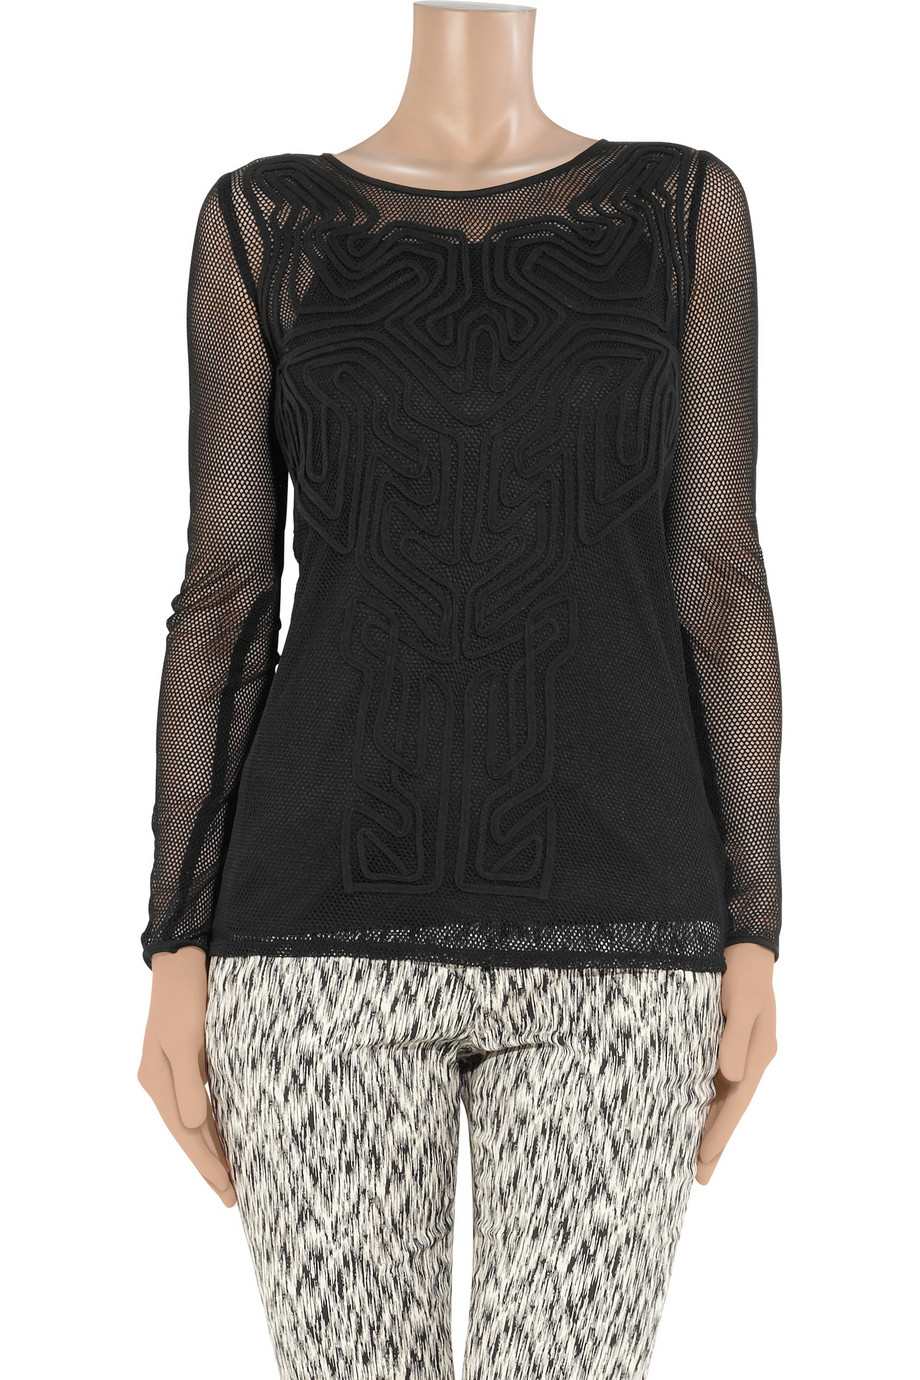 Lyst - Alice by temperley Tijuana Embroidered Mesh Top in Black